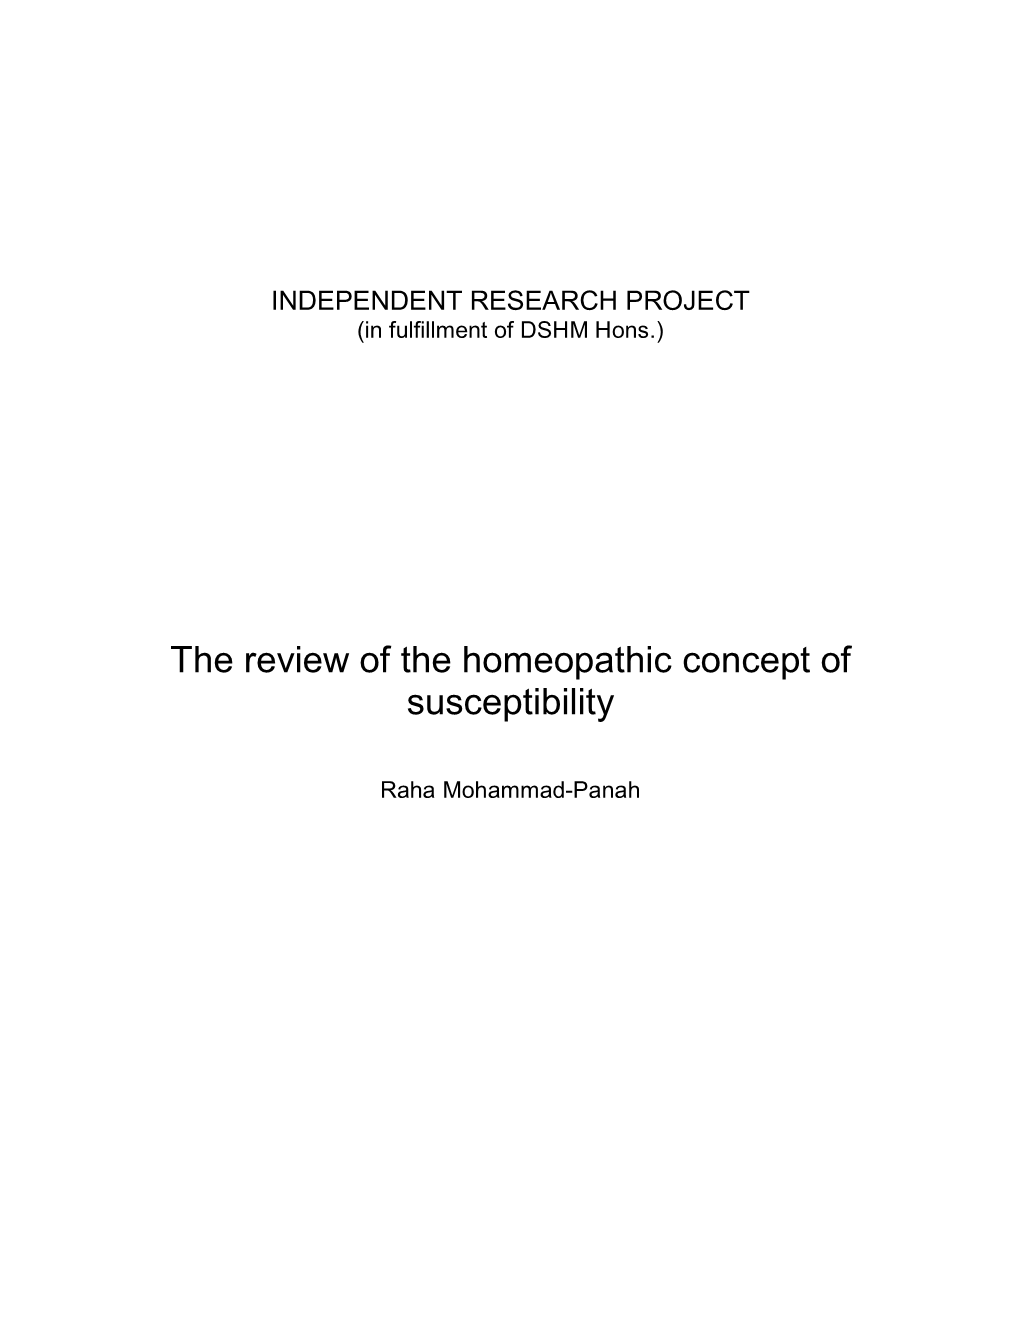 The Review of the Homeopathic Concept of Susceptibility